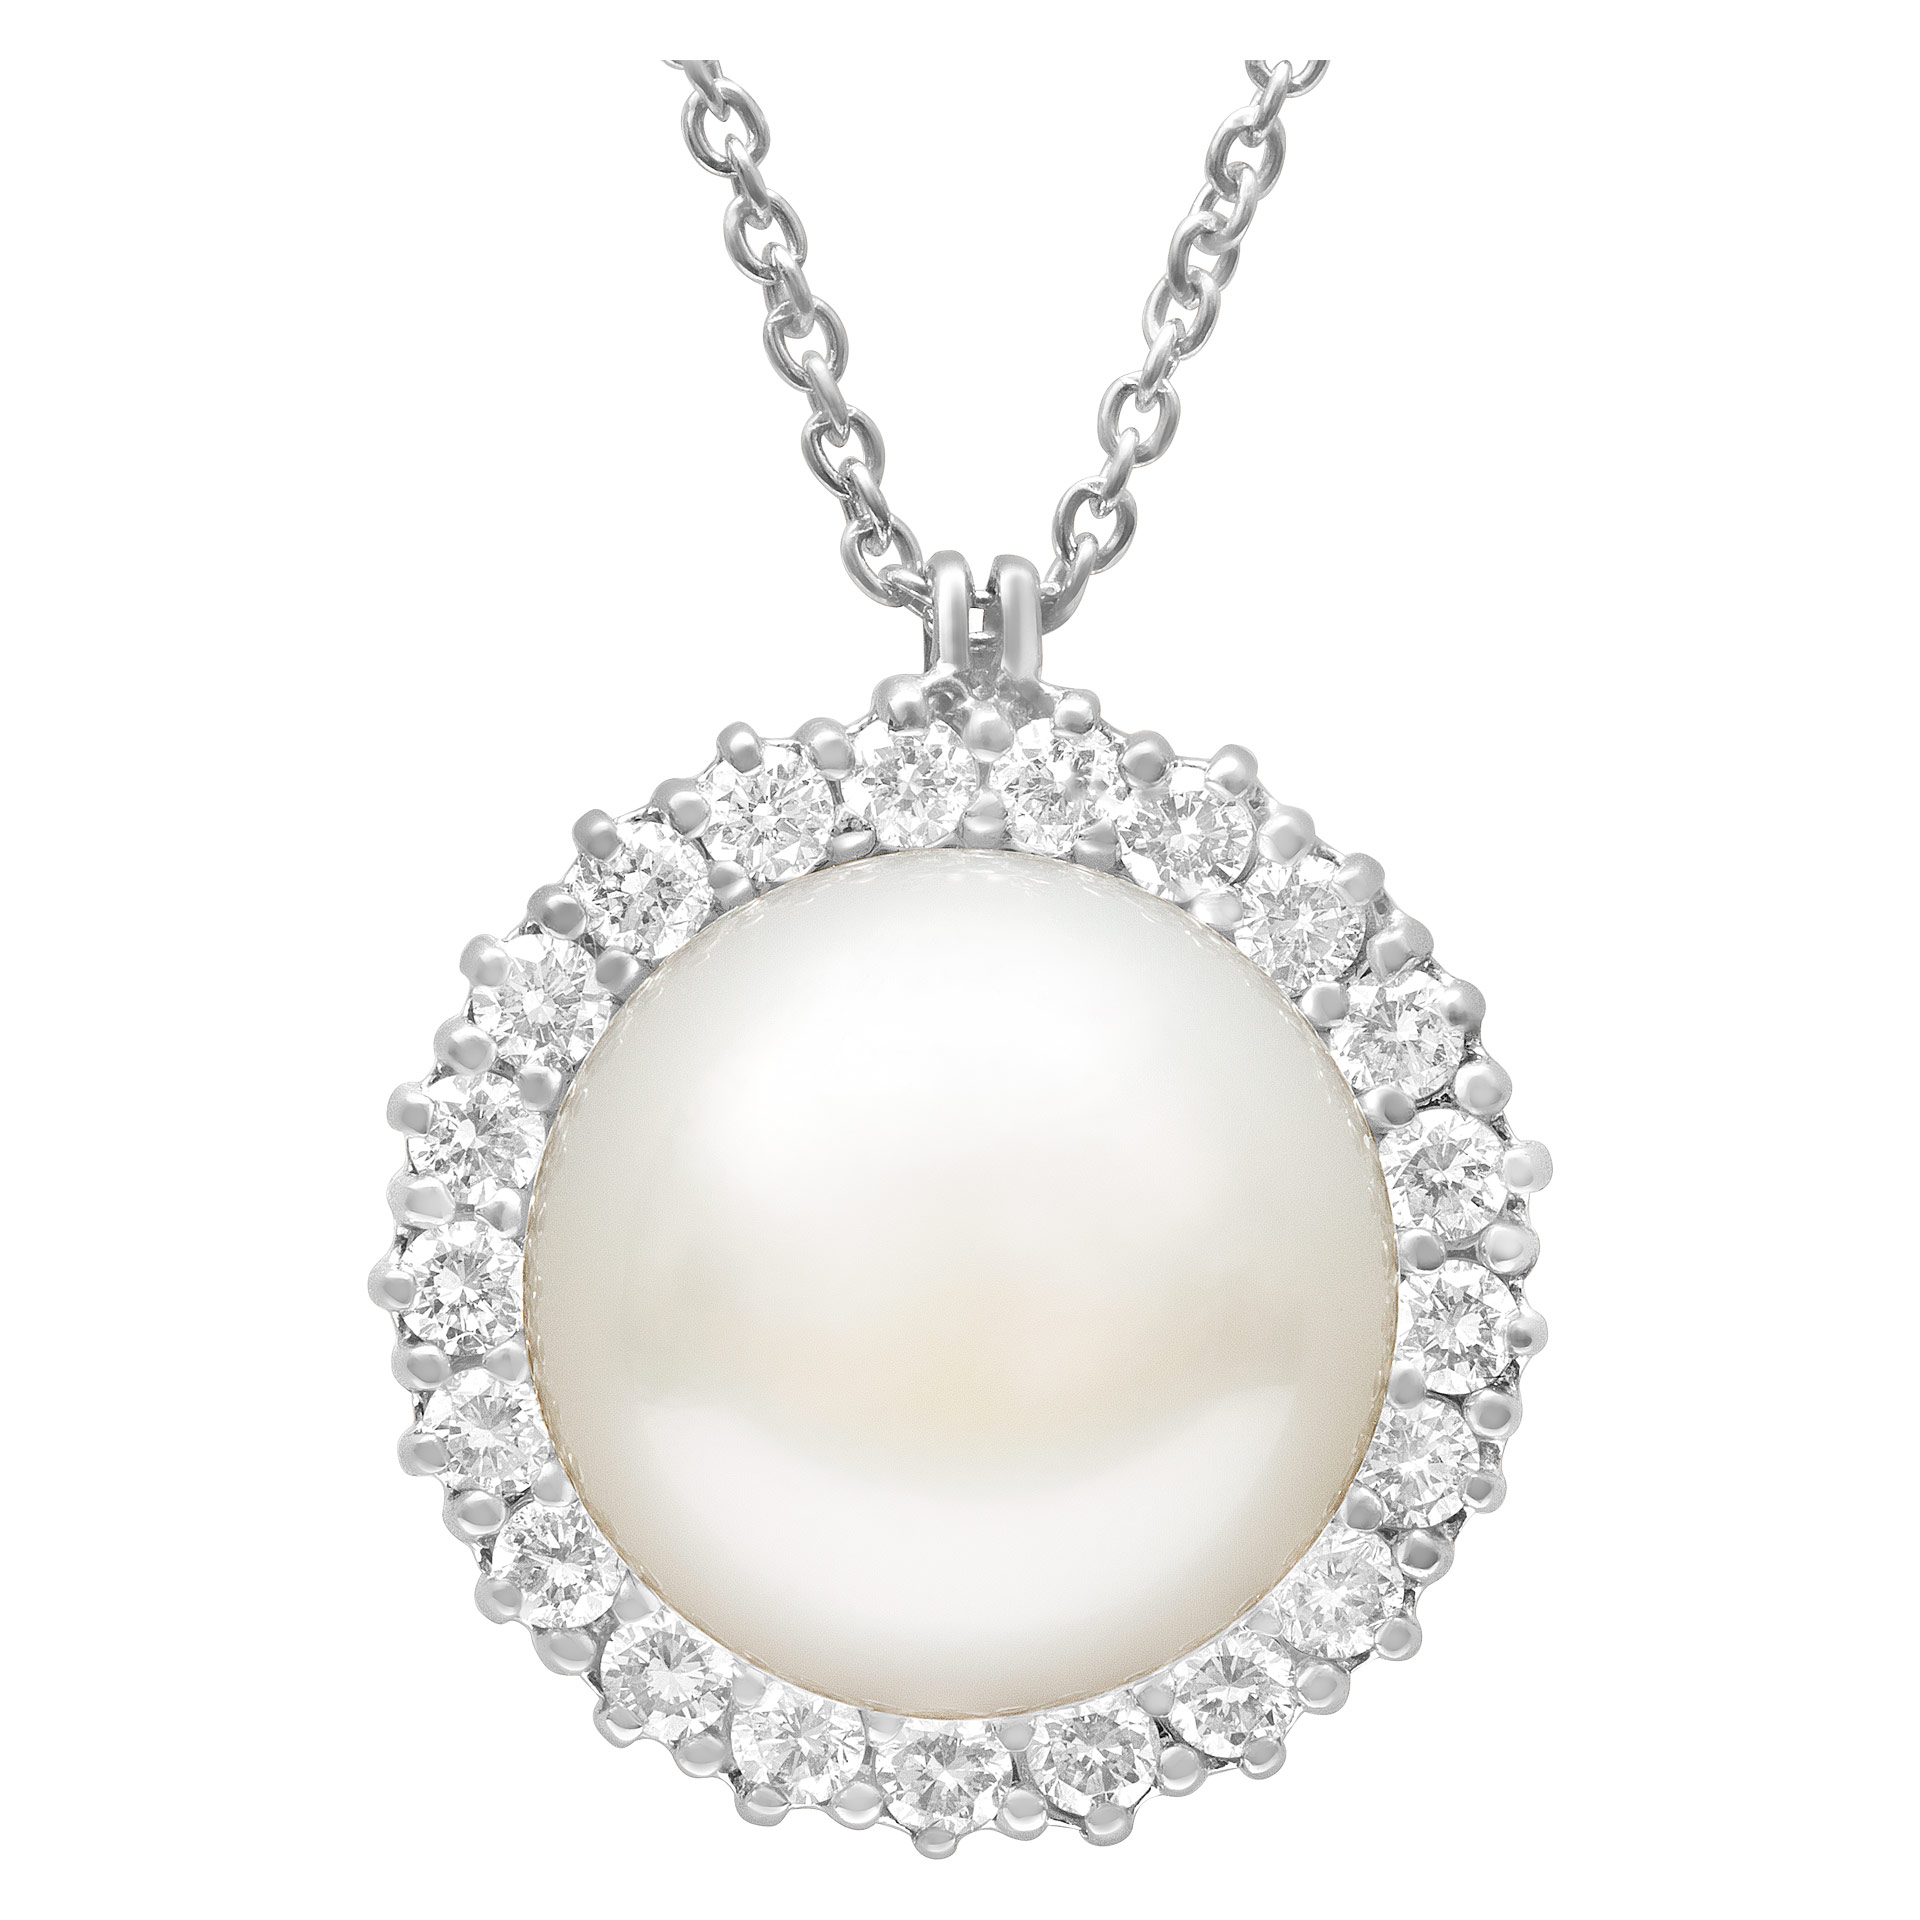 South sea pearl pendant necklace with diamonds in 18k white gold chain image 1